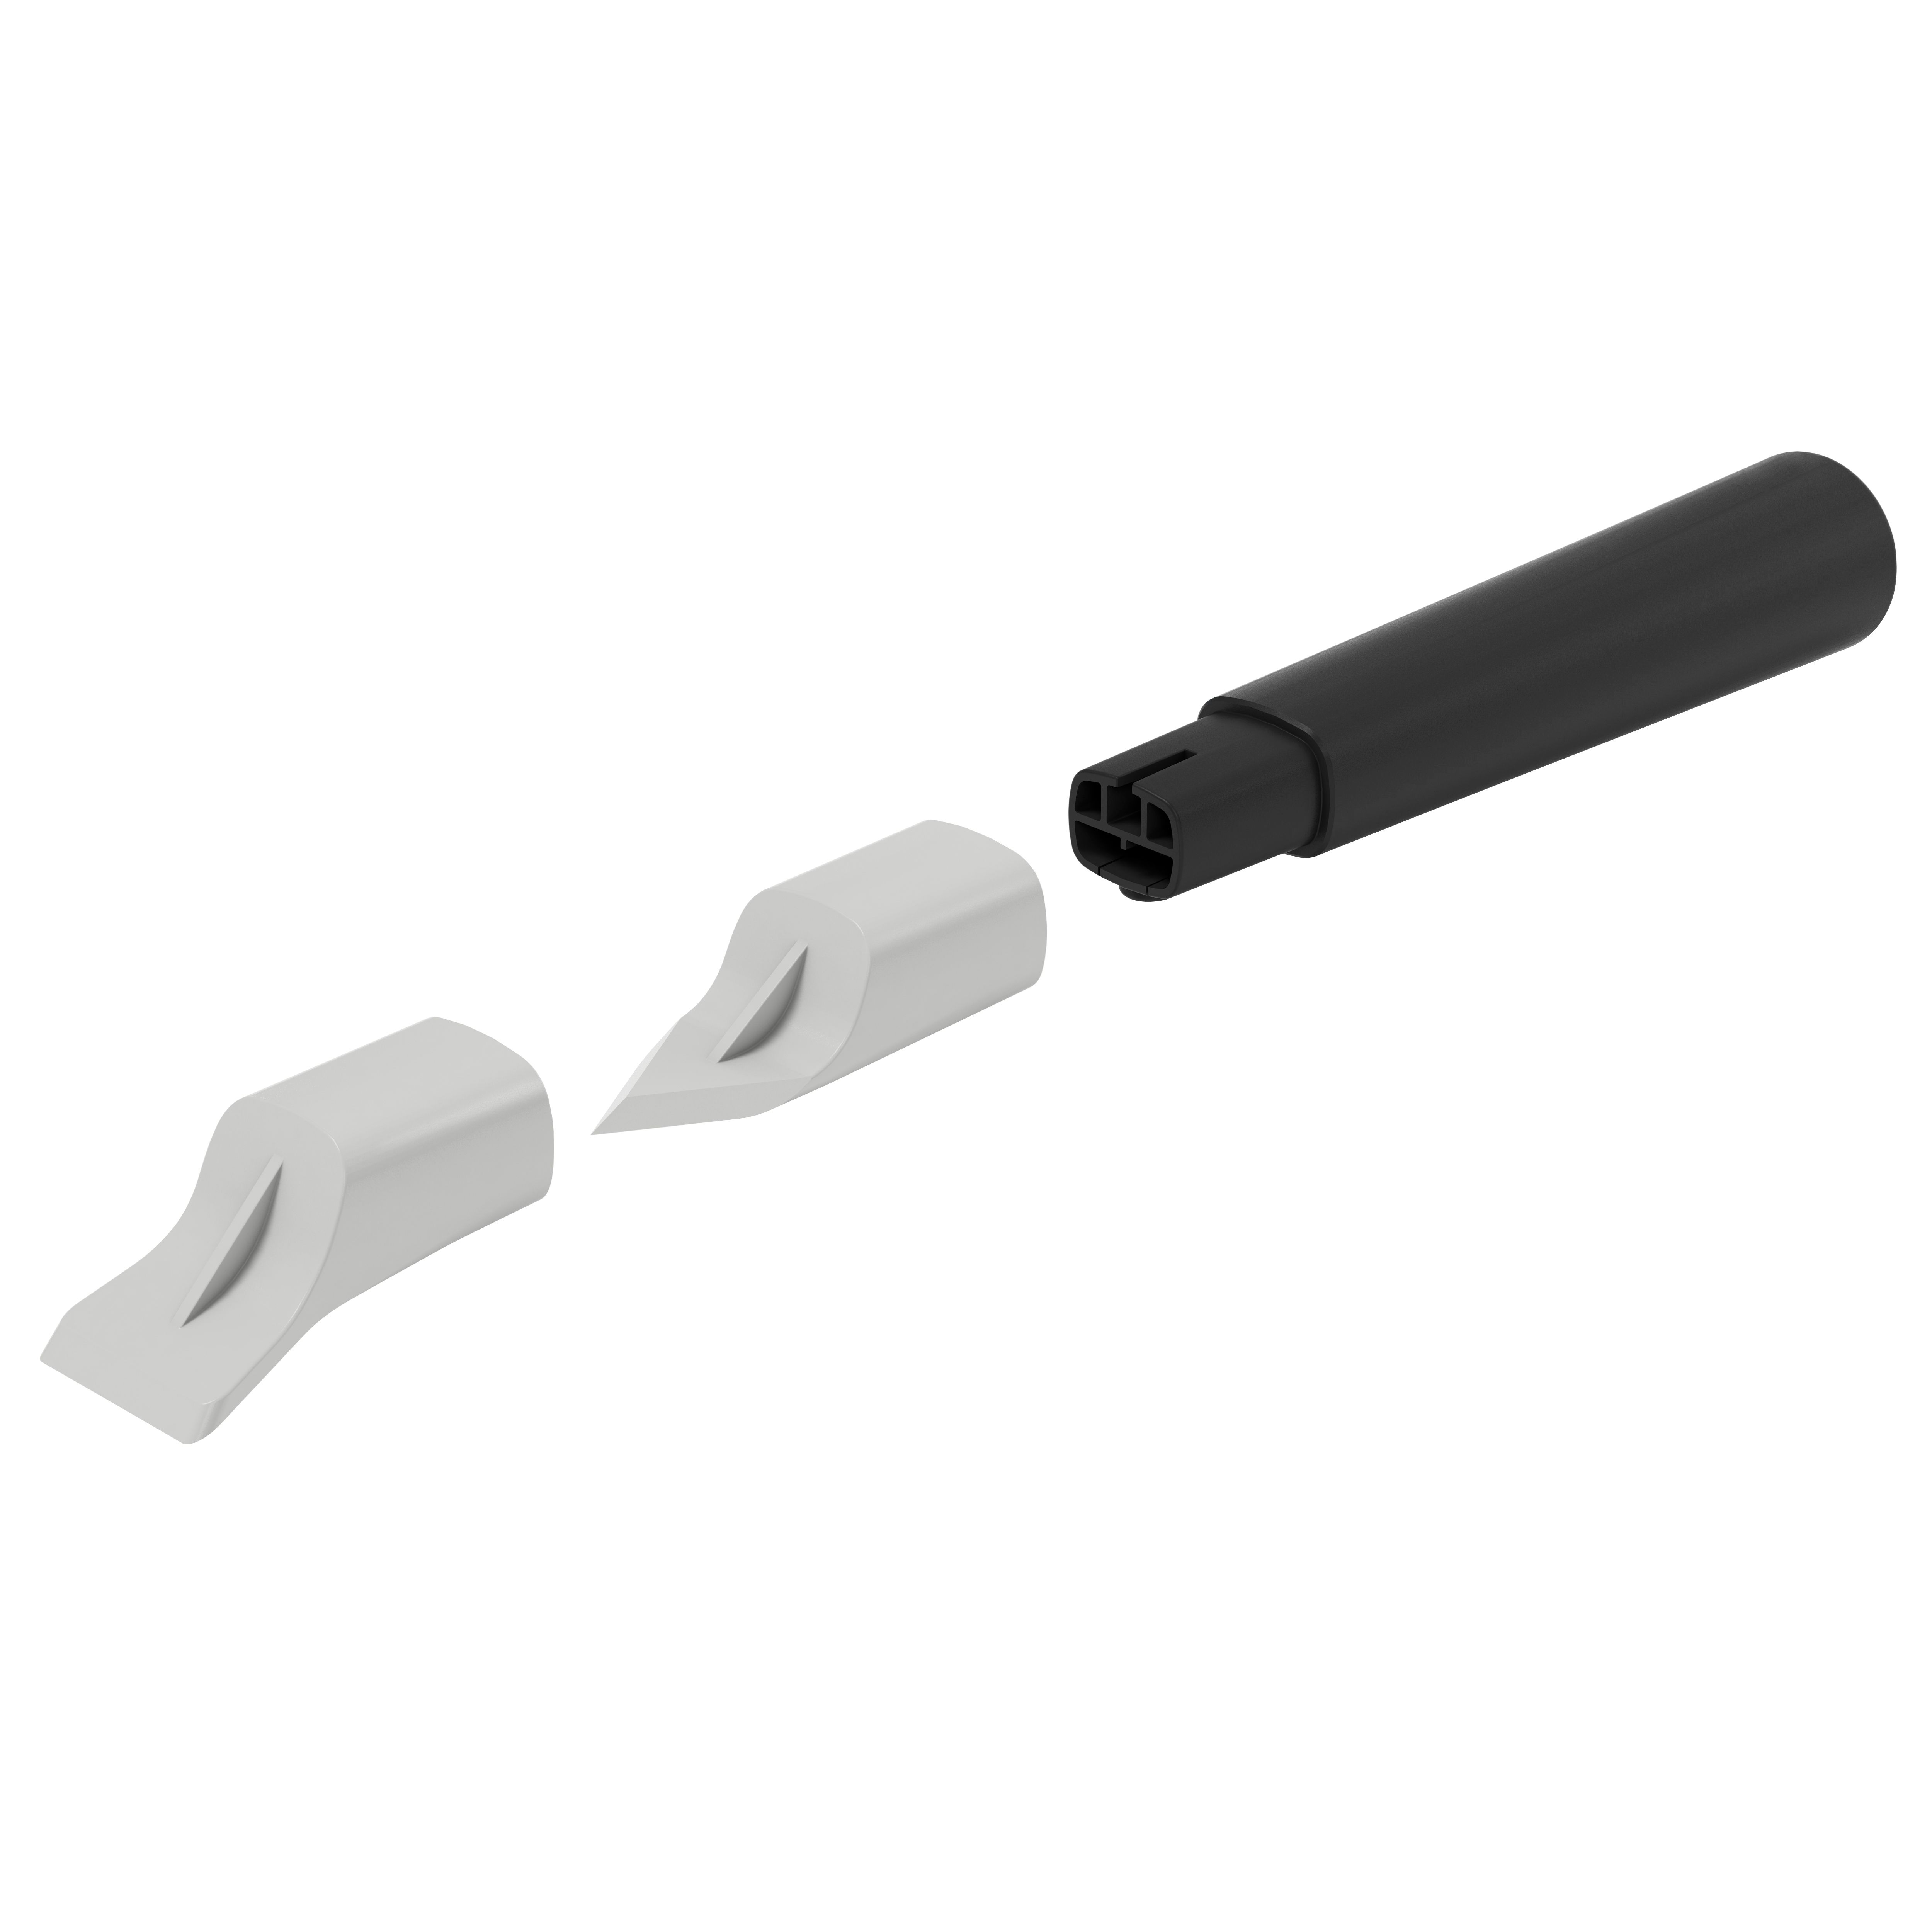 Volden Sealant removing tool, Set of 2